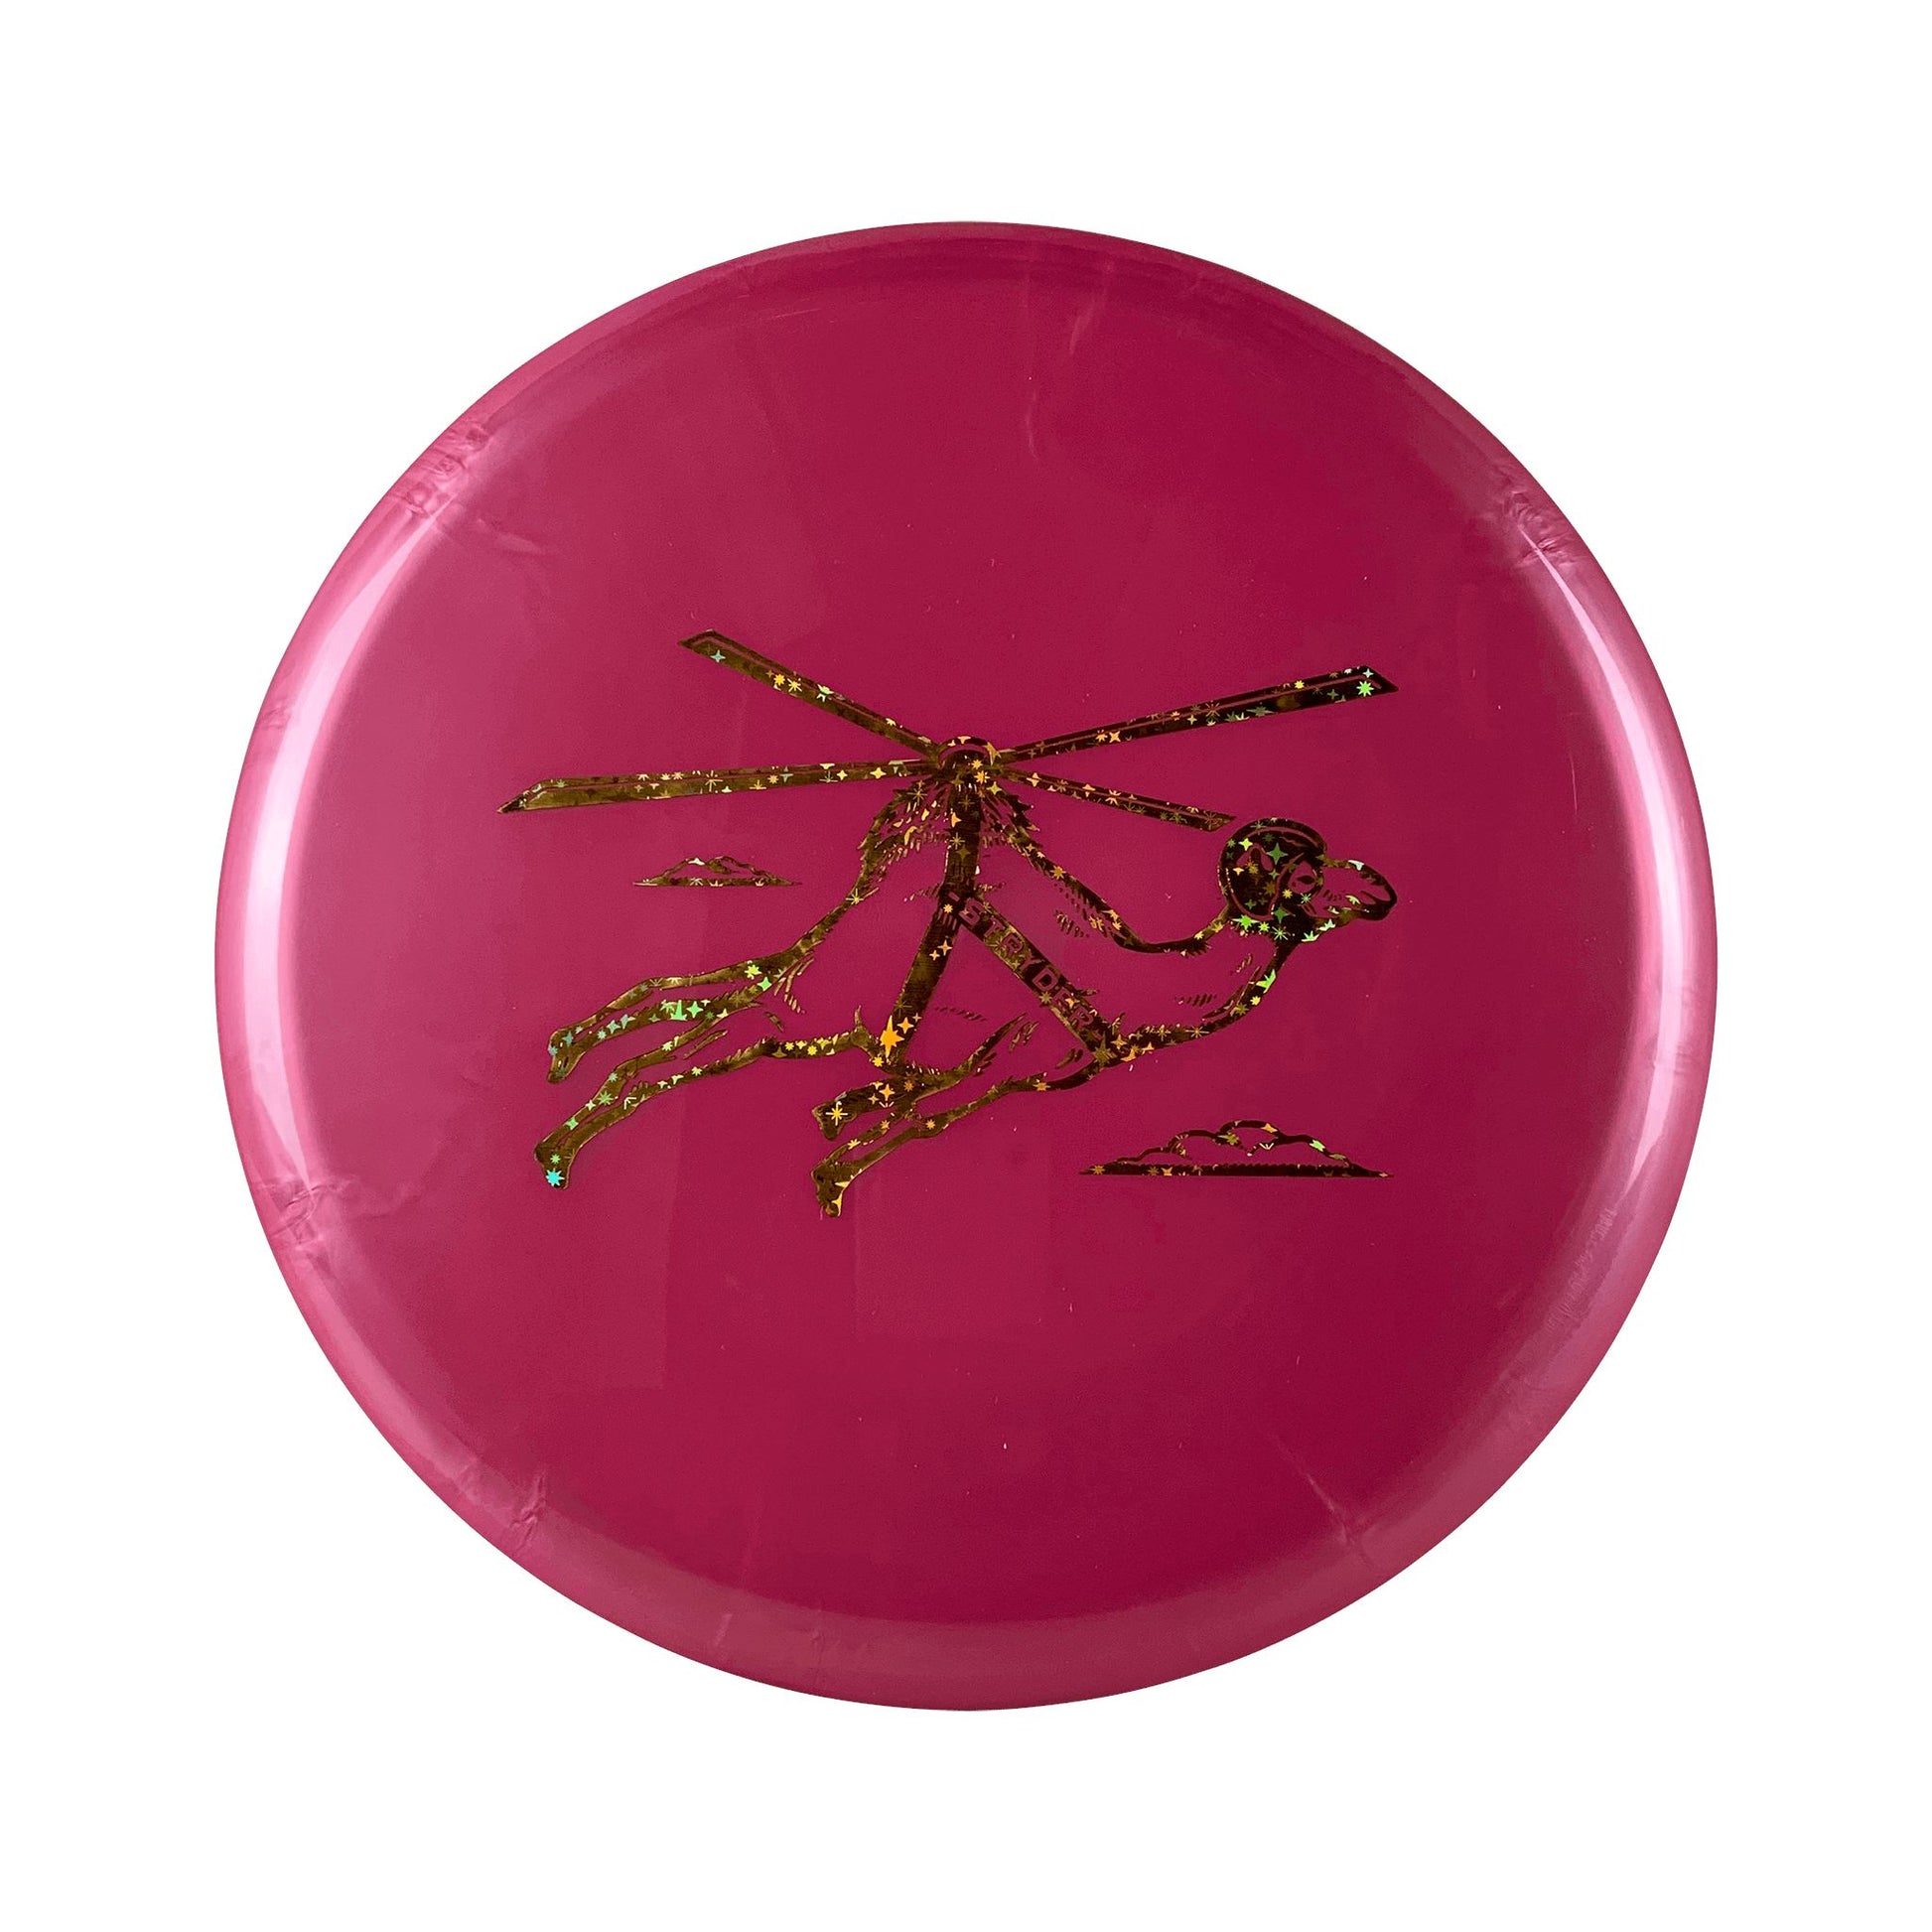 500 Stryder - Airborn Proto Stamp Cale Leiviska Disc Prodigy multi / red 178 